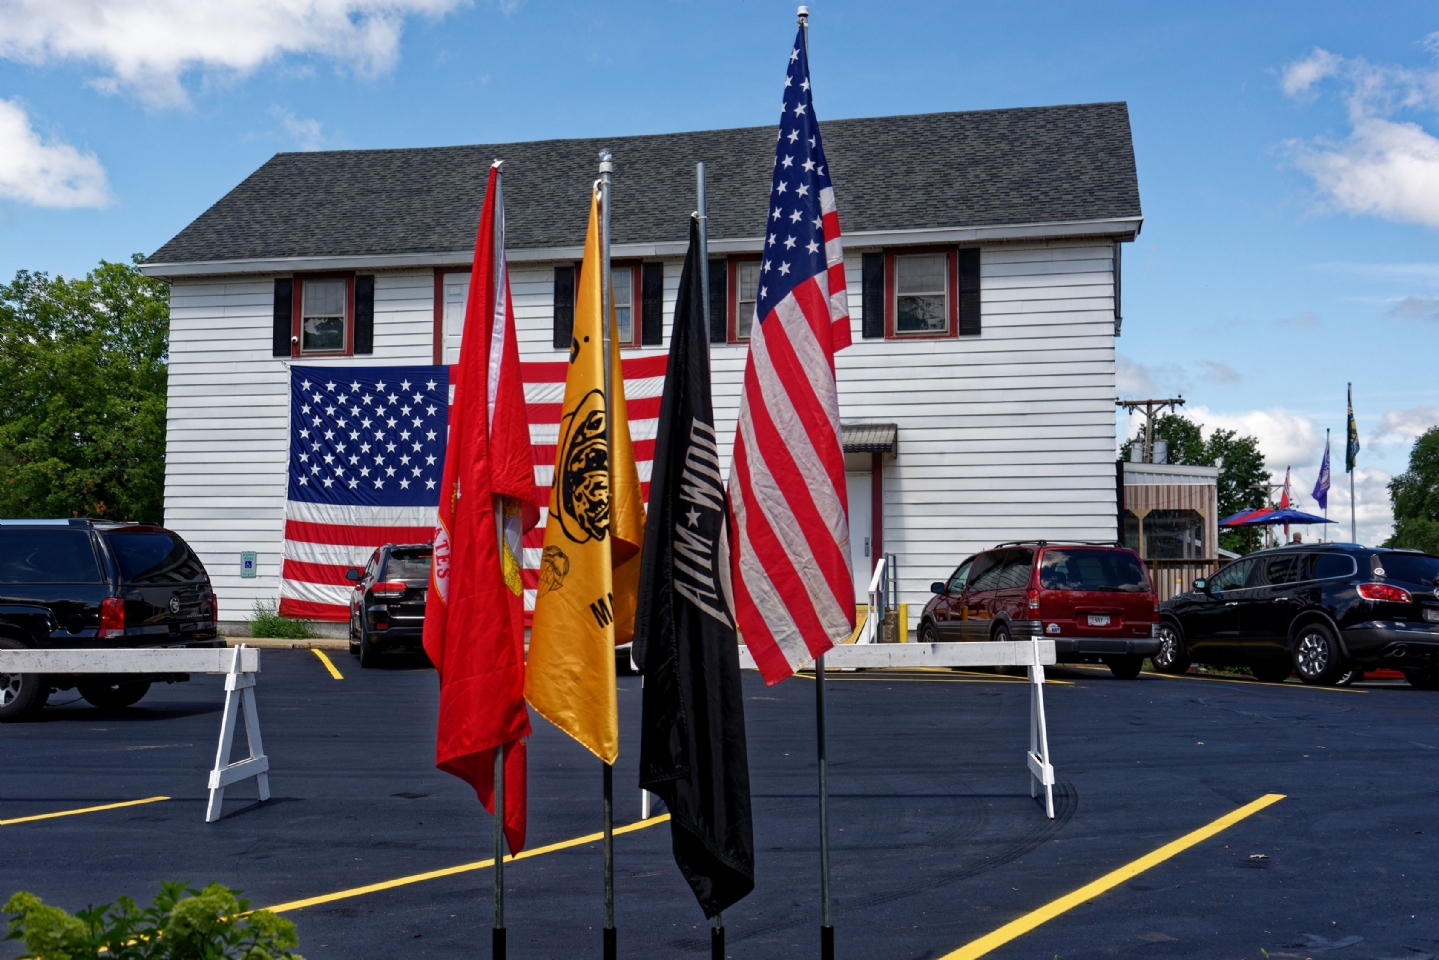 View of flags and the Post.